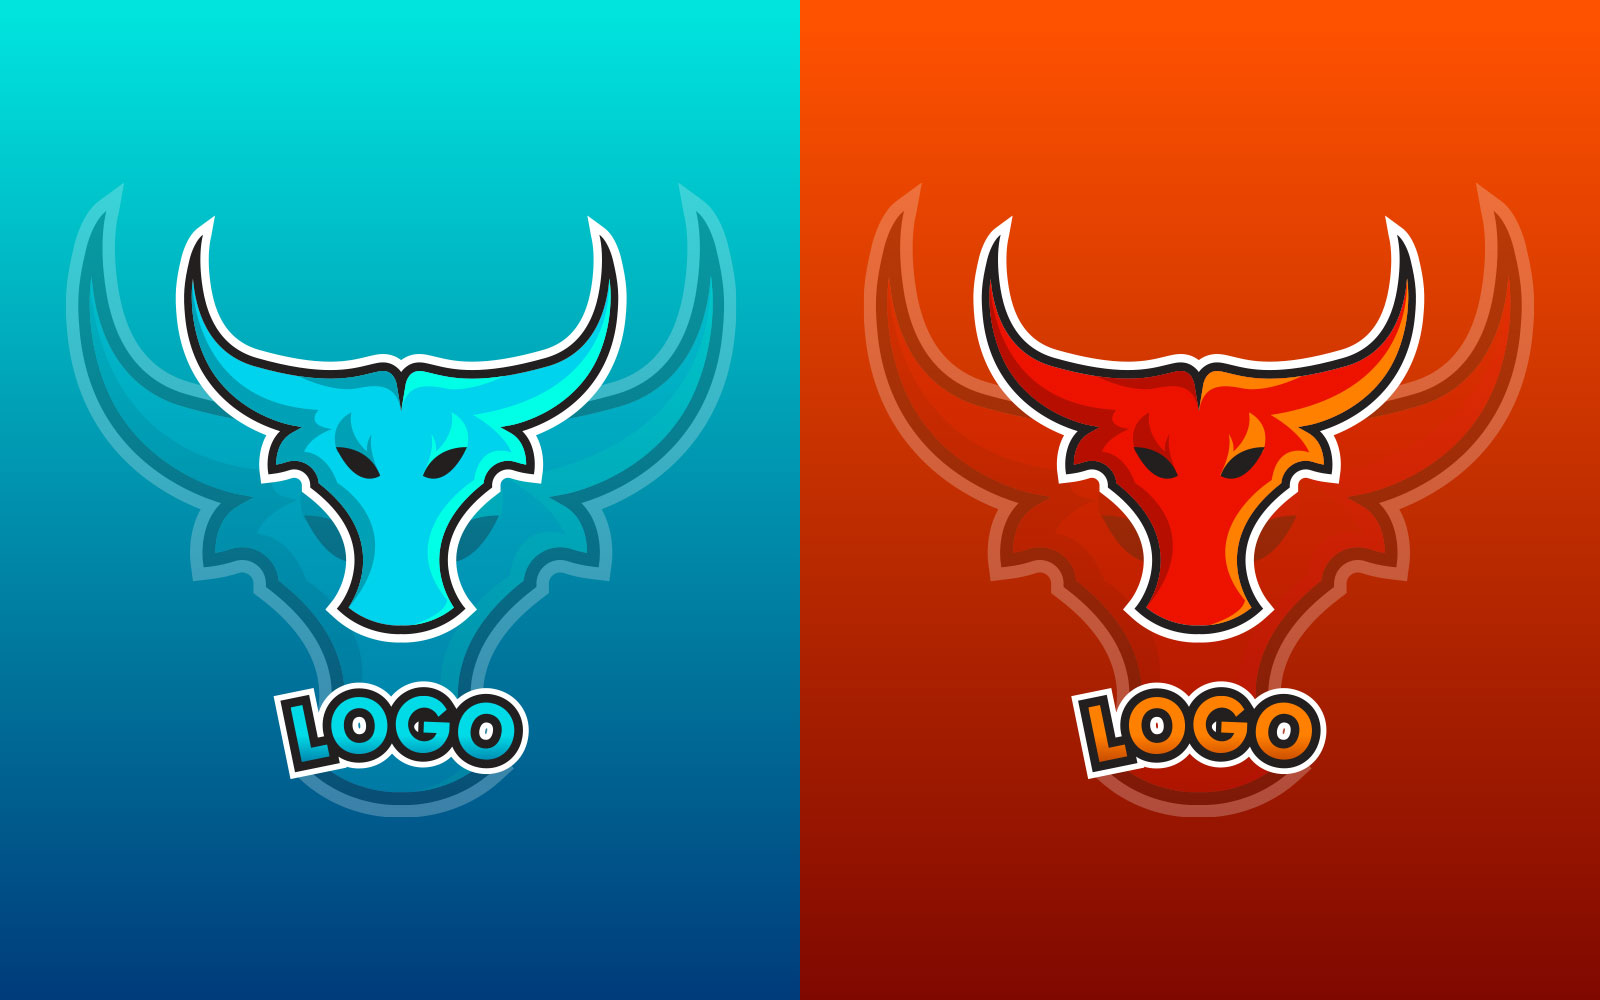 Two logo options.